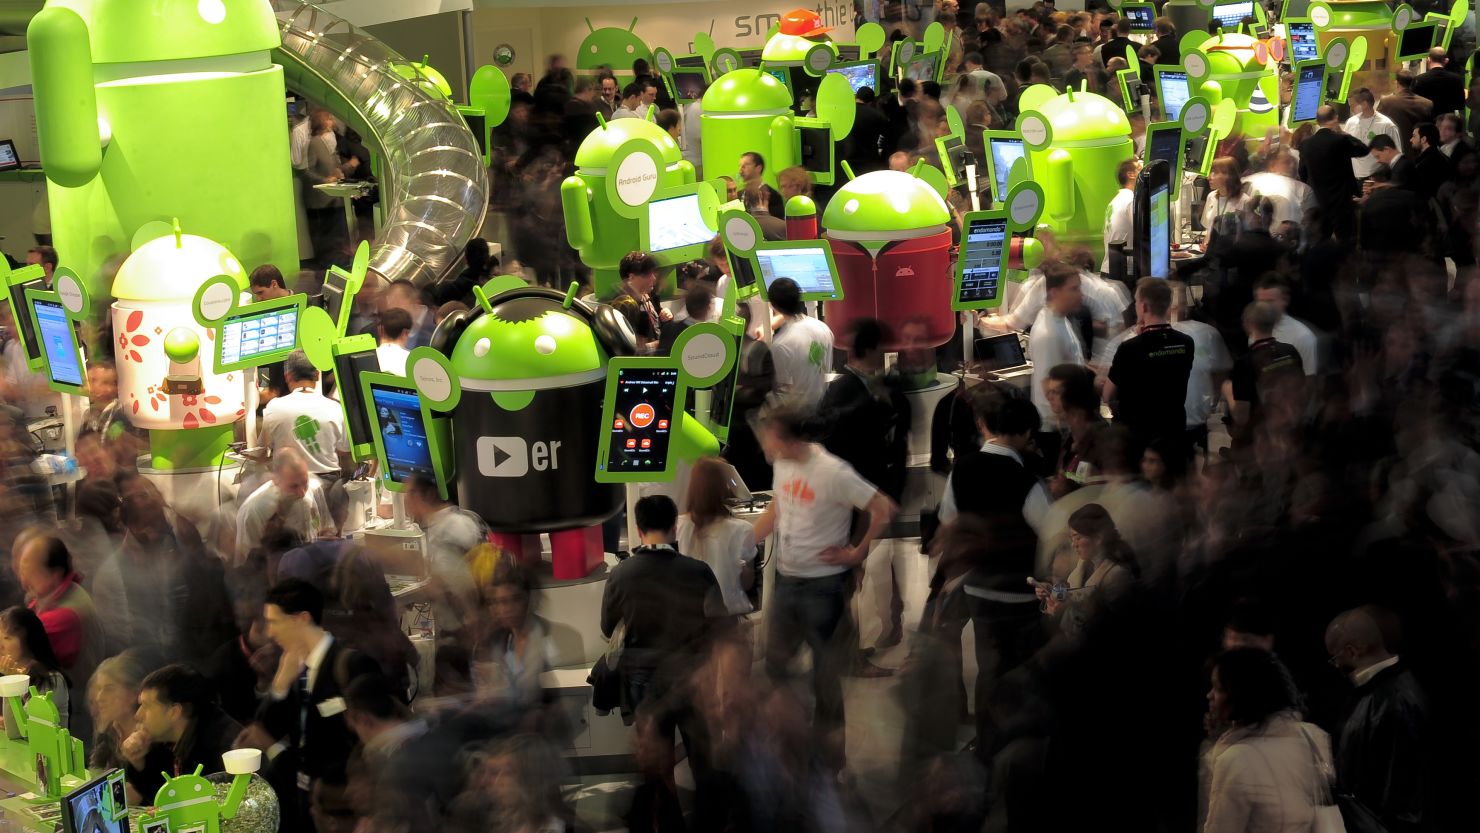 Participants throng around exhibits at the 2011 Mobile World World congress in Barcelona.